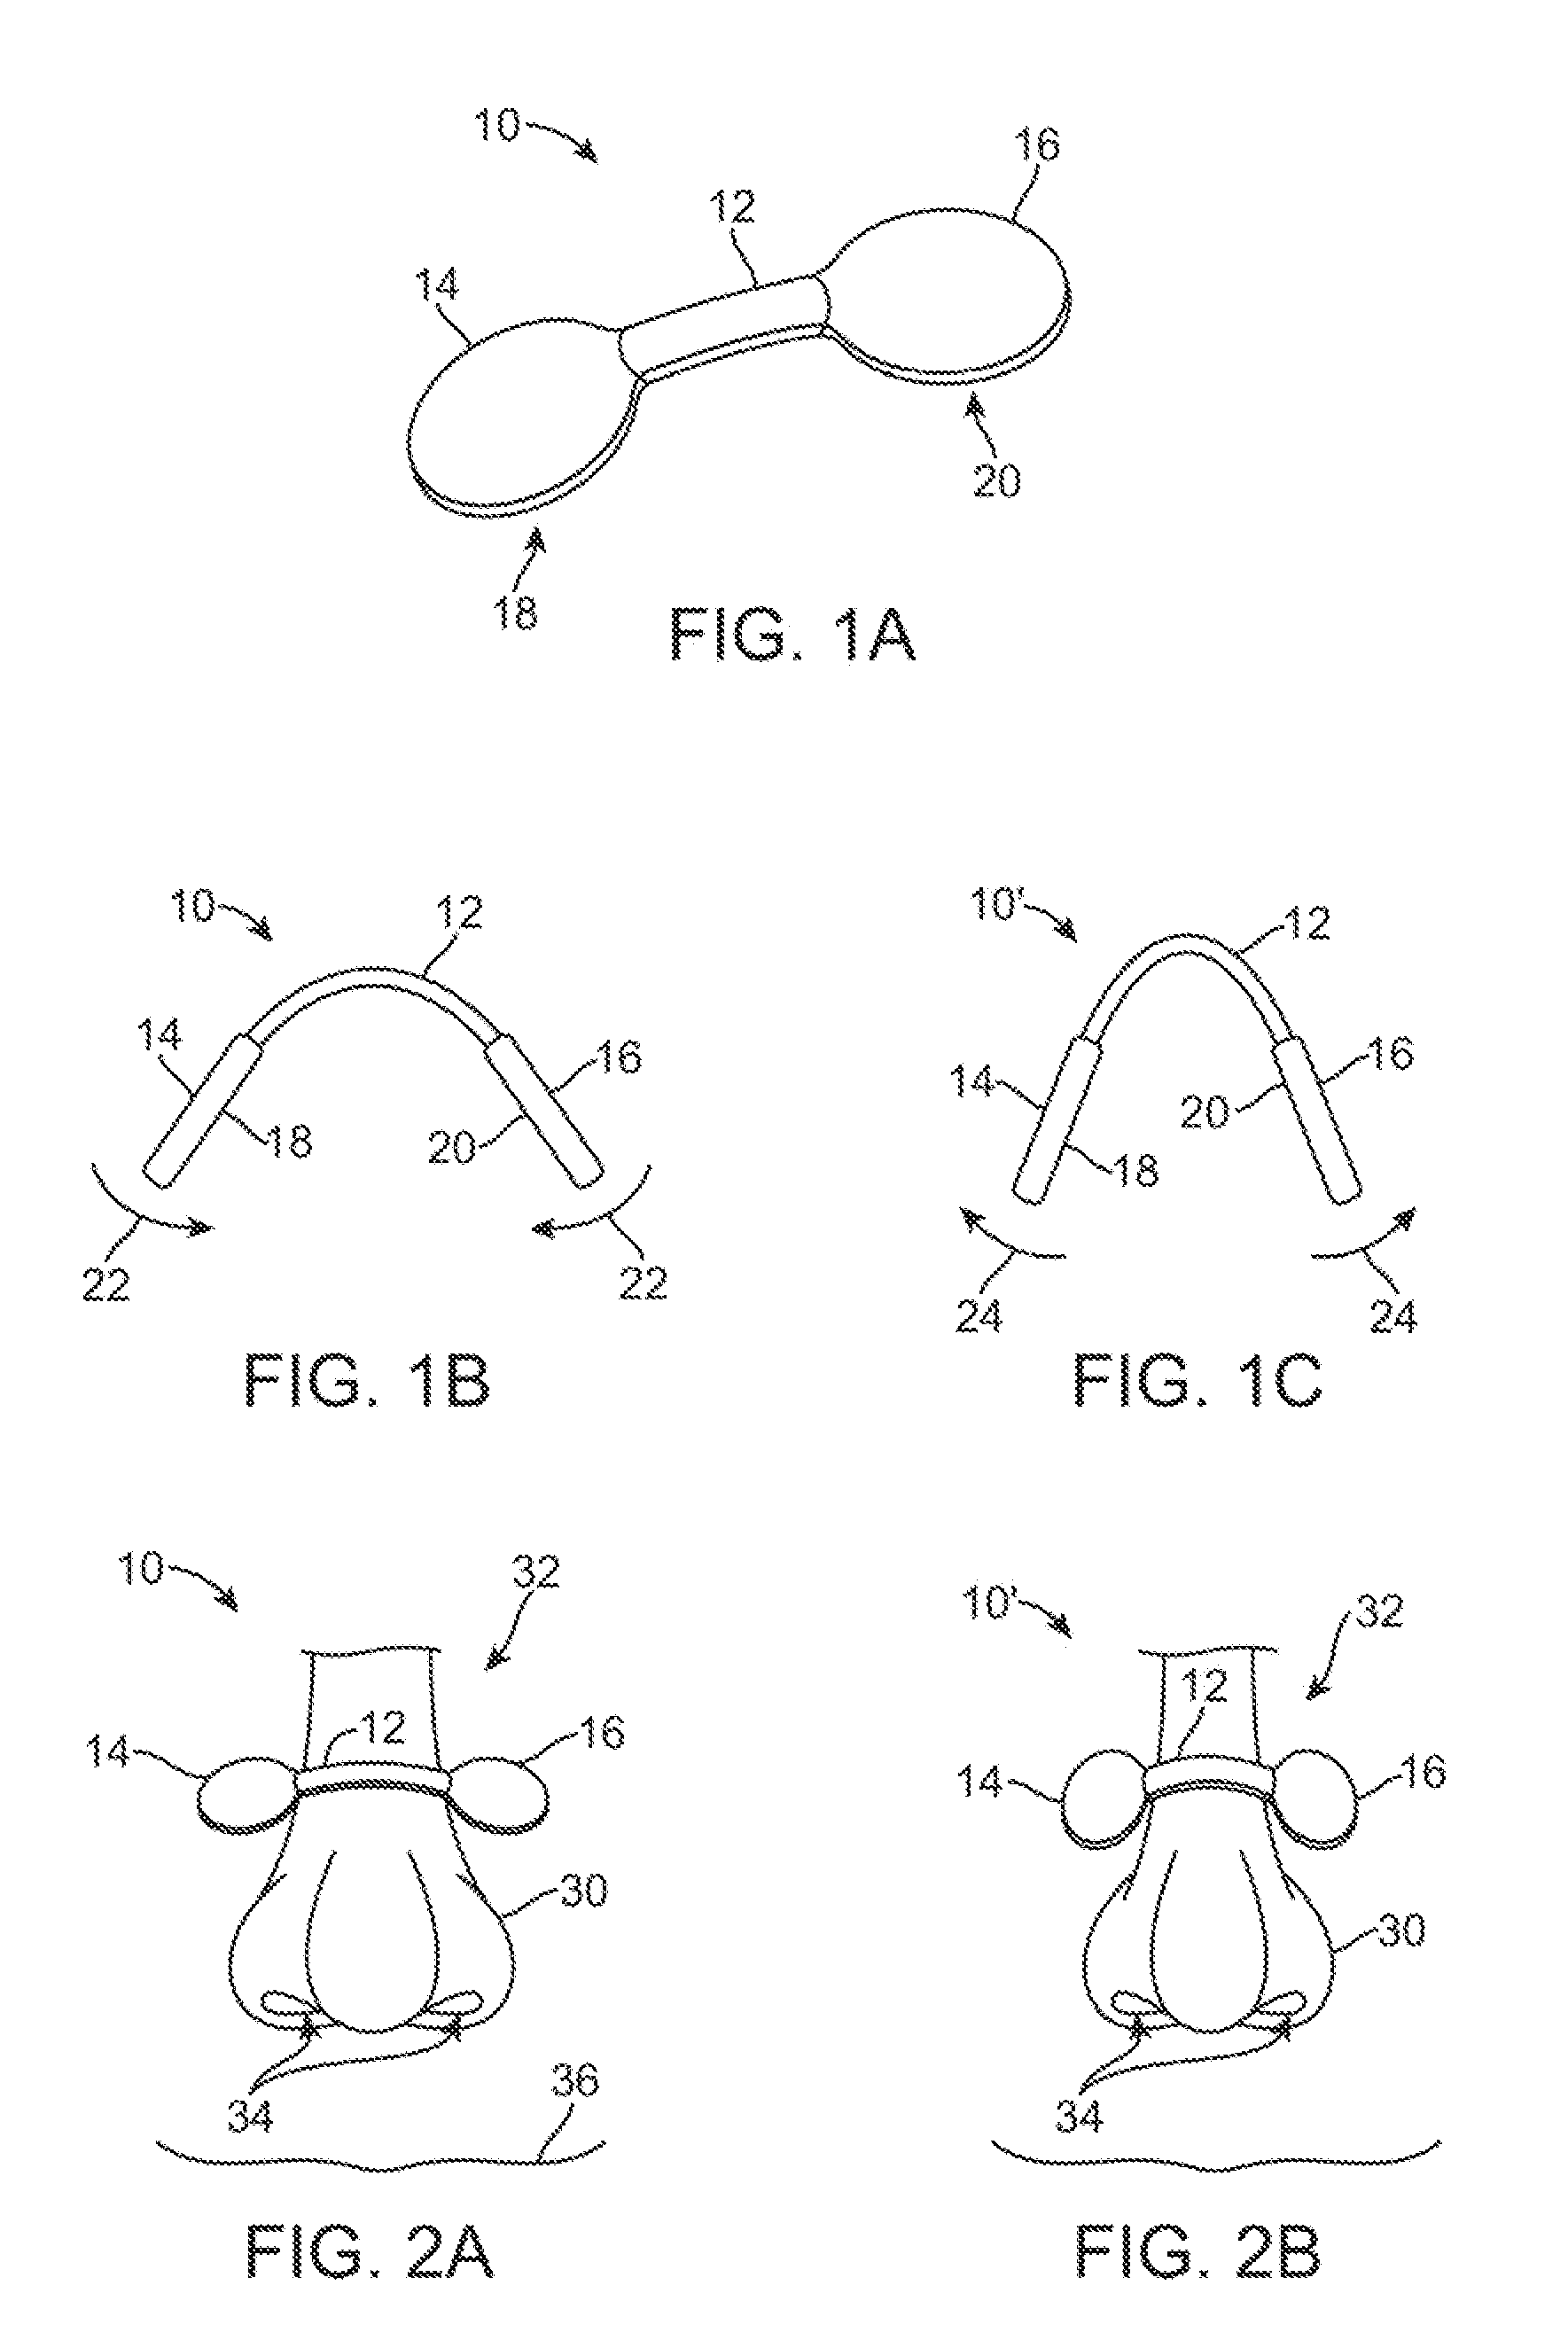 Airflow restriction system